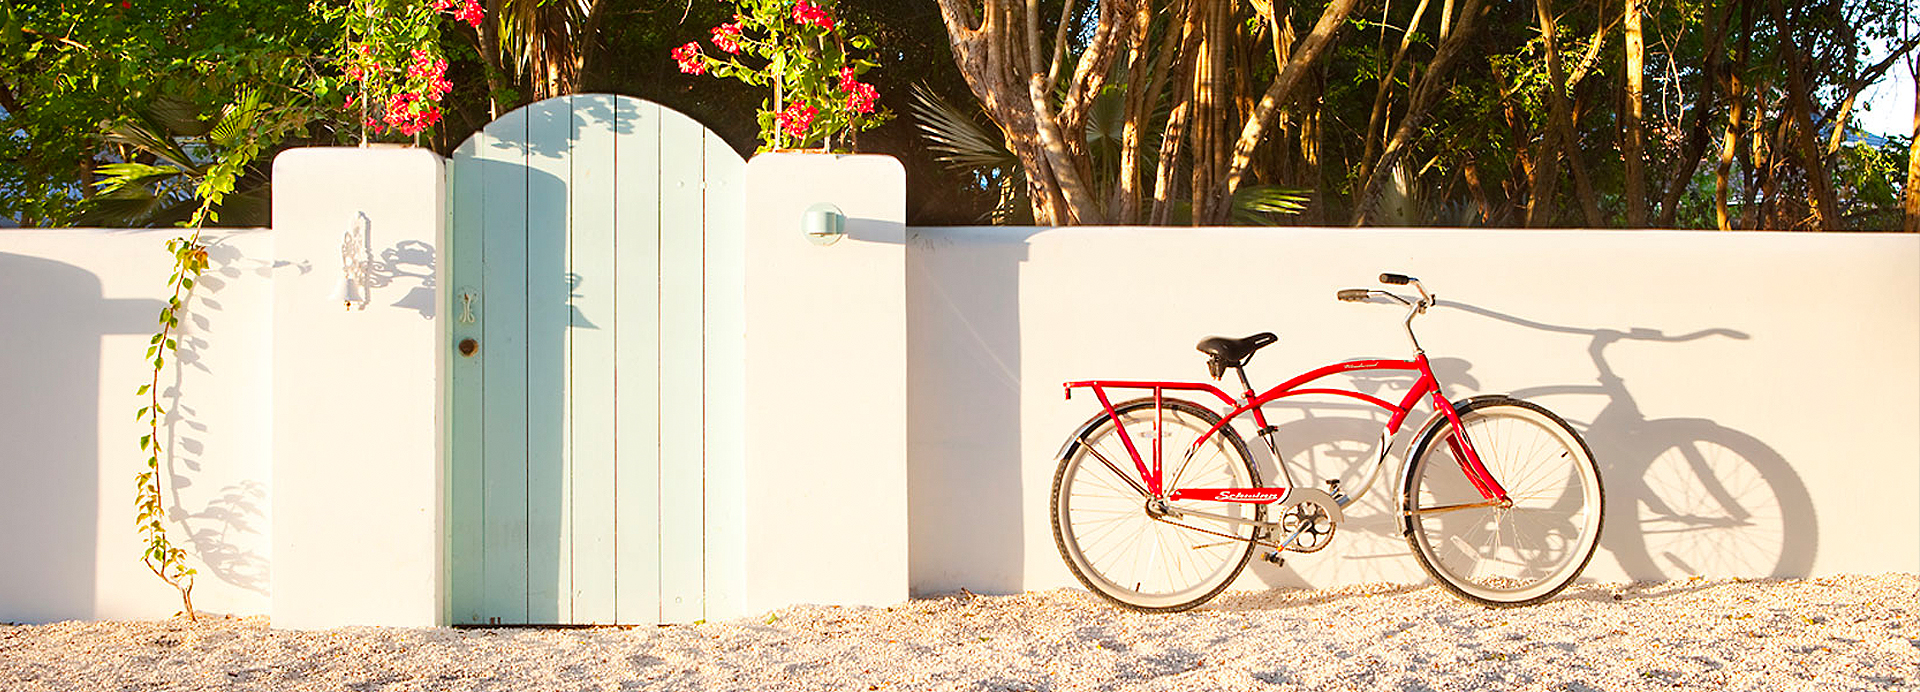 Red bicycle propped against beige colored concrete wall with beige gravel underneath.